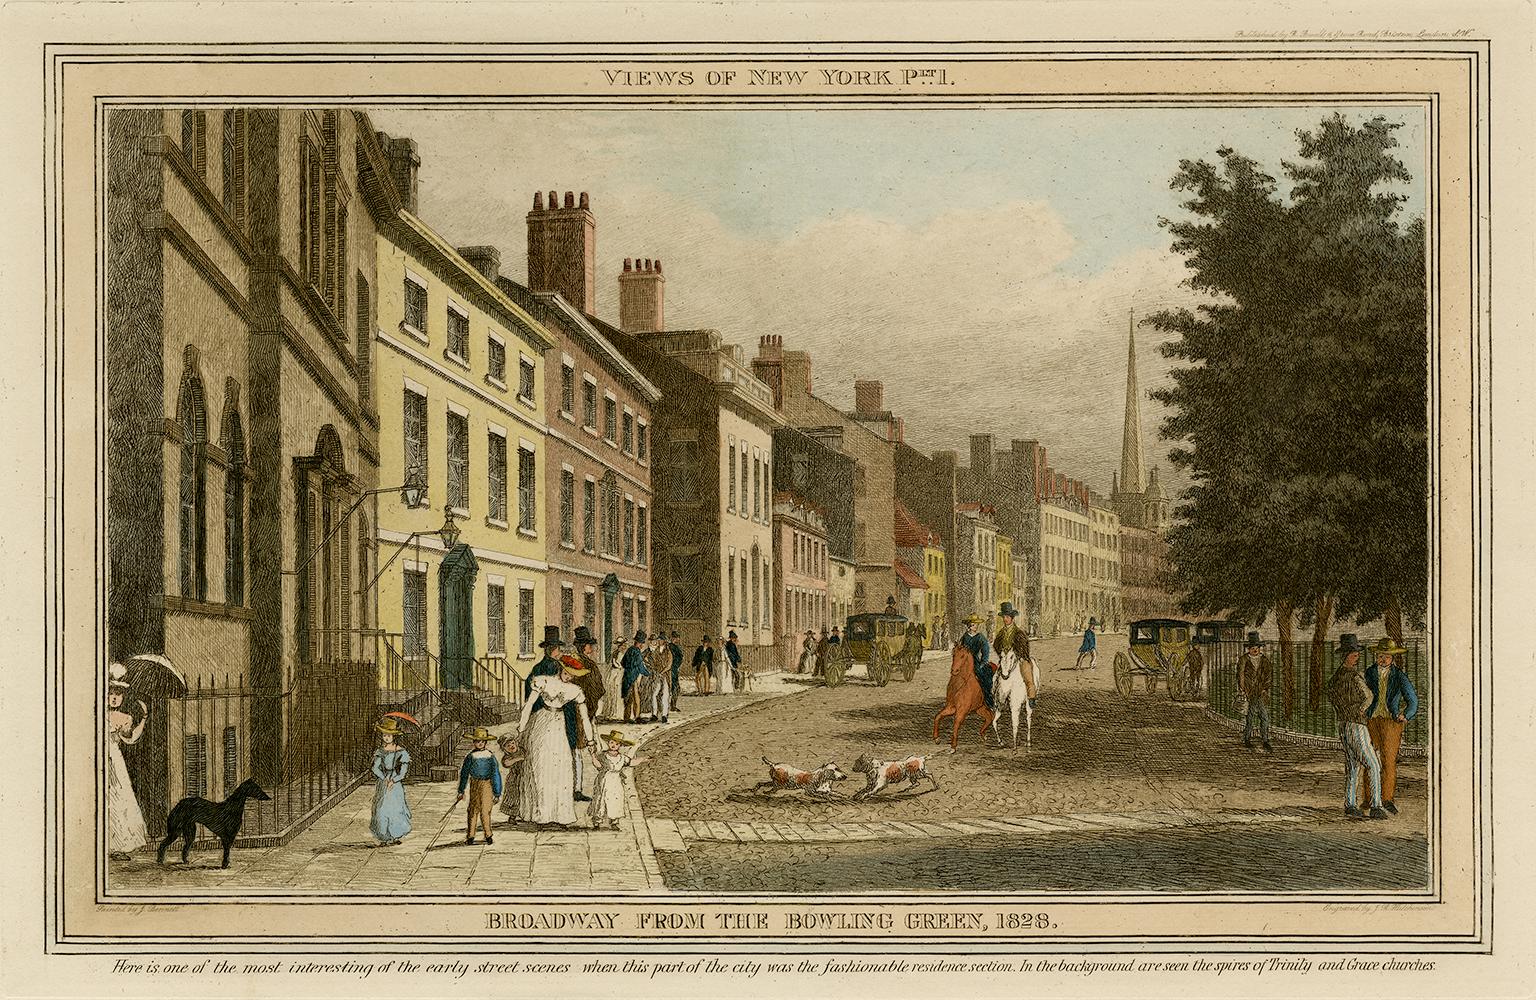 J. R. Hutchinson Figurative Print - Broadway from the Bowling Green, 1828   — early New York City, hand-coloring